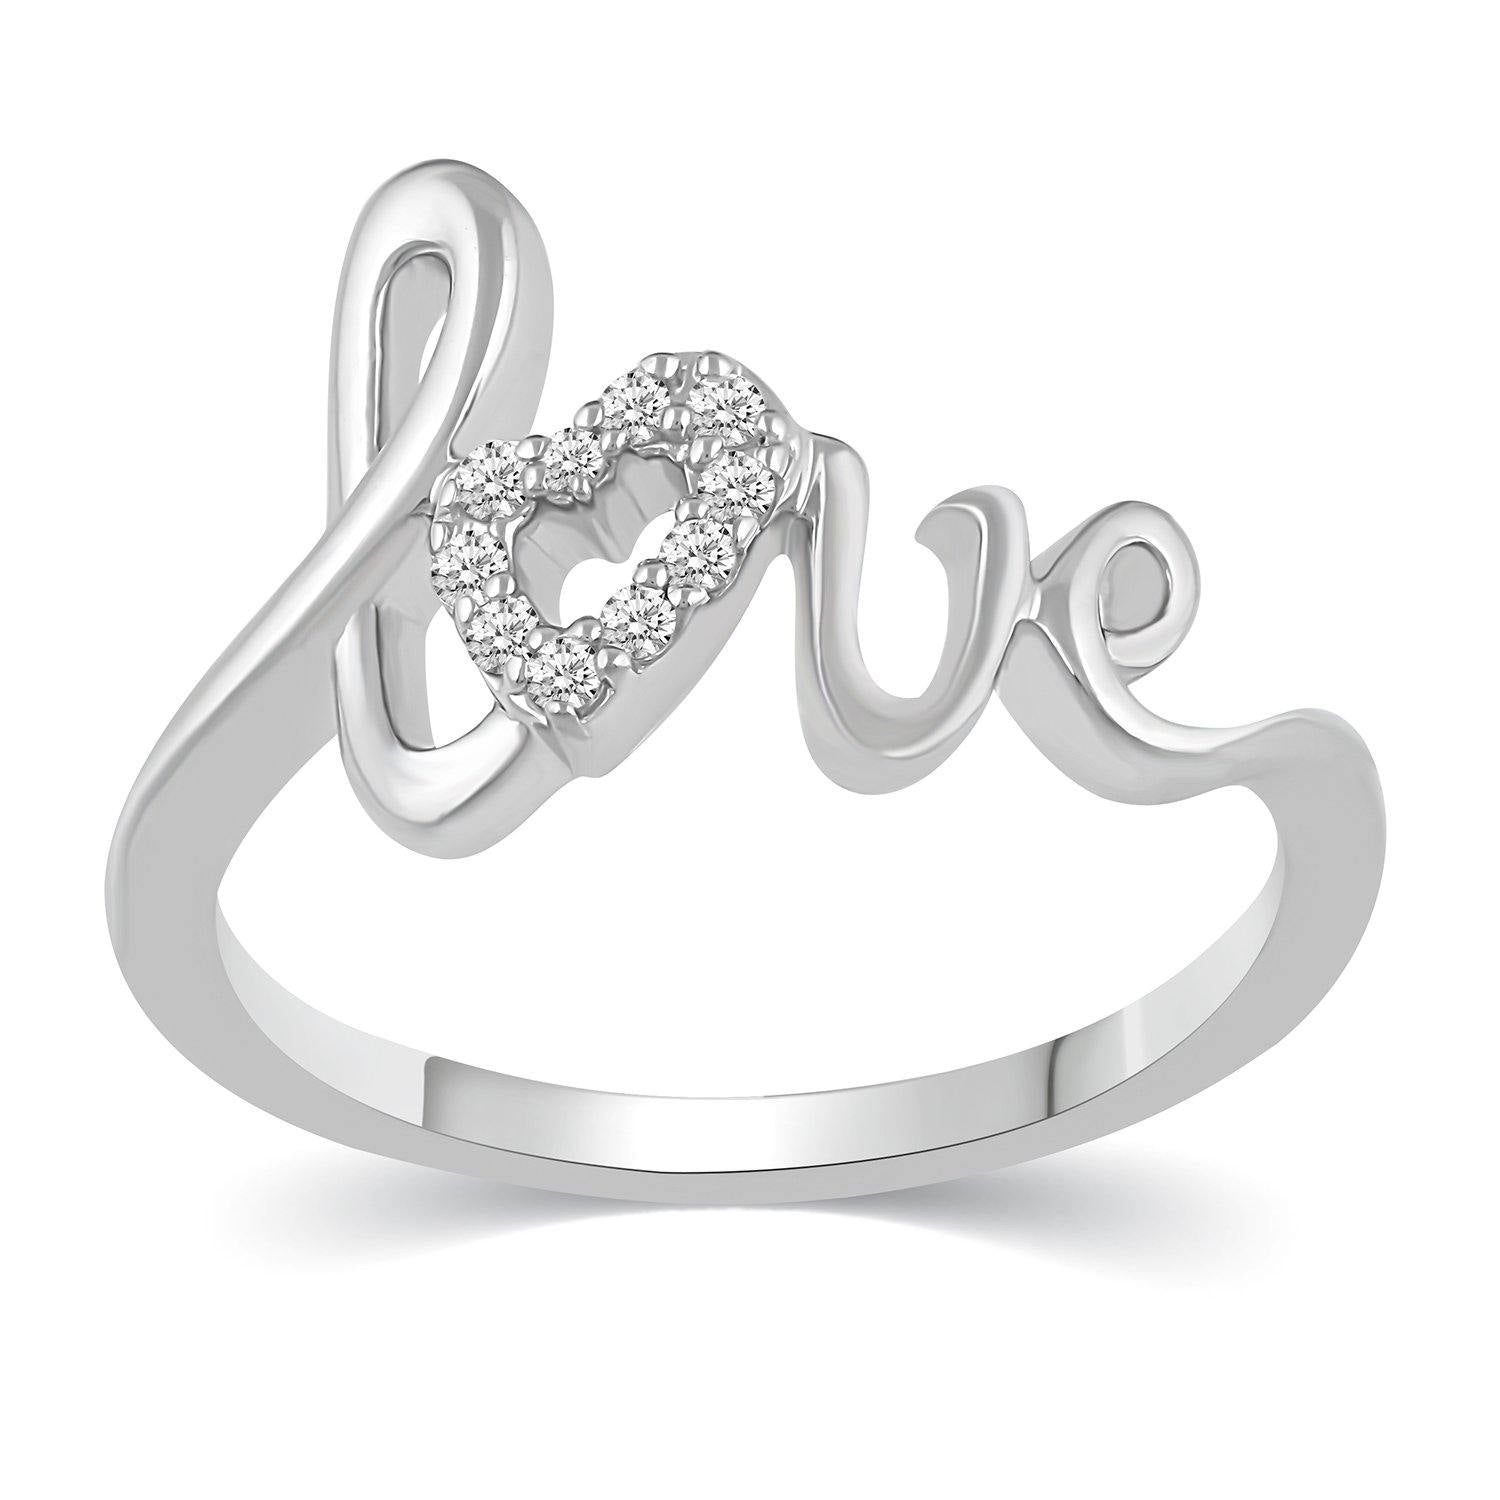 Beautifully Crafted Heart Sterling Silver Ring - Chandrani Pearls